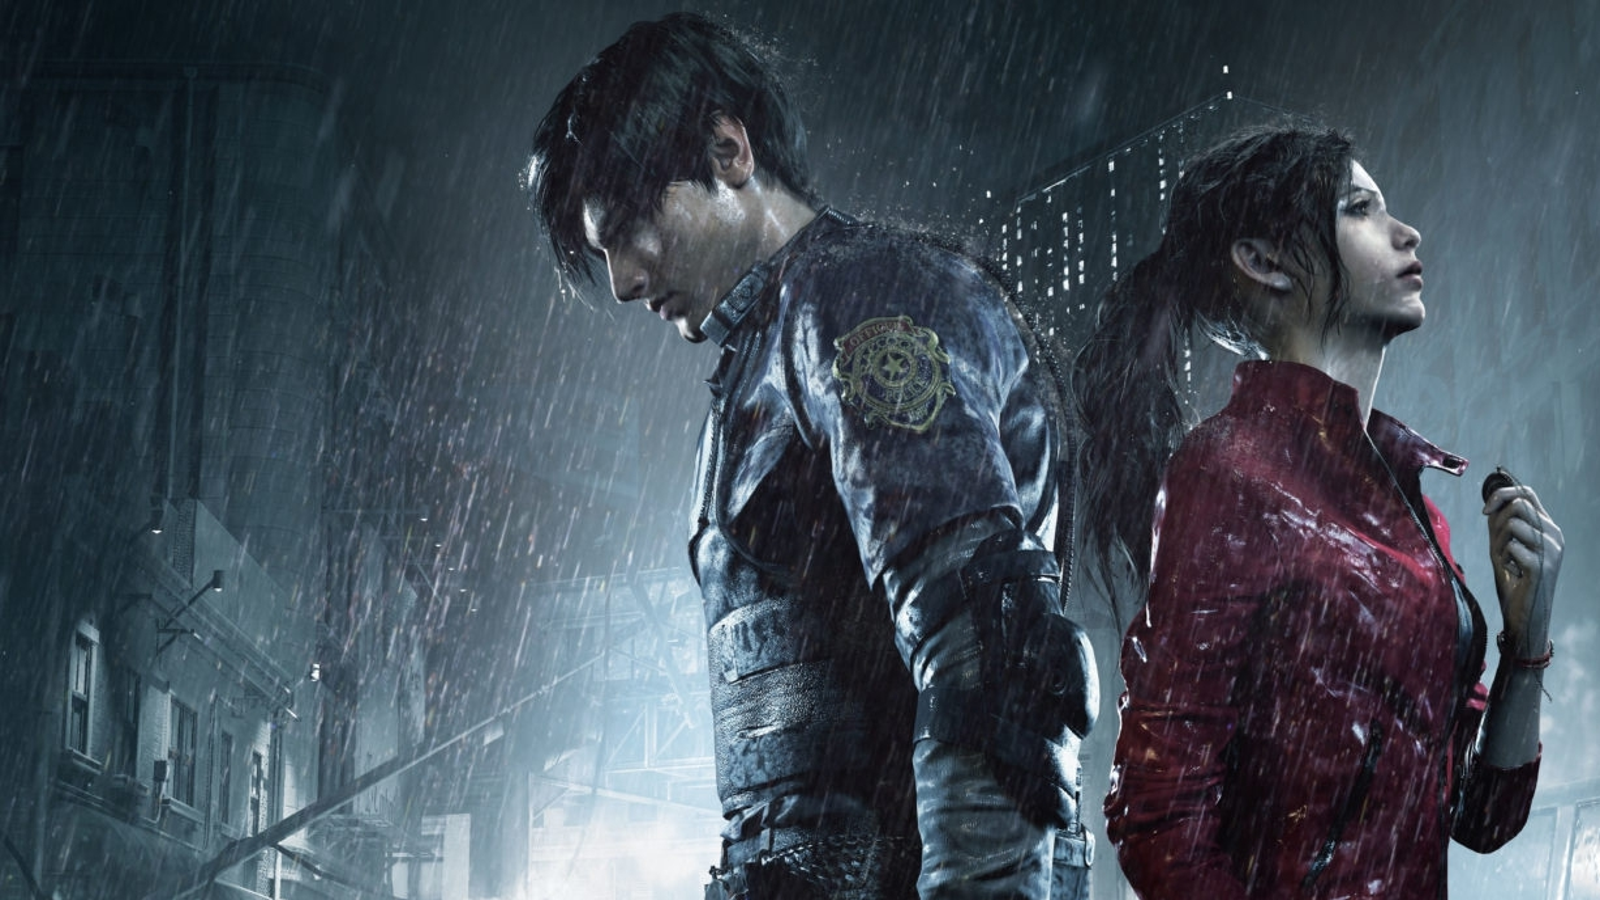 Resident Evil 4 Remake Has Been Confirmed For PS4 But Xbox One Misses Out